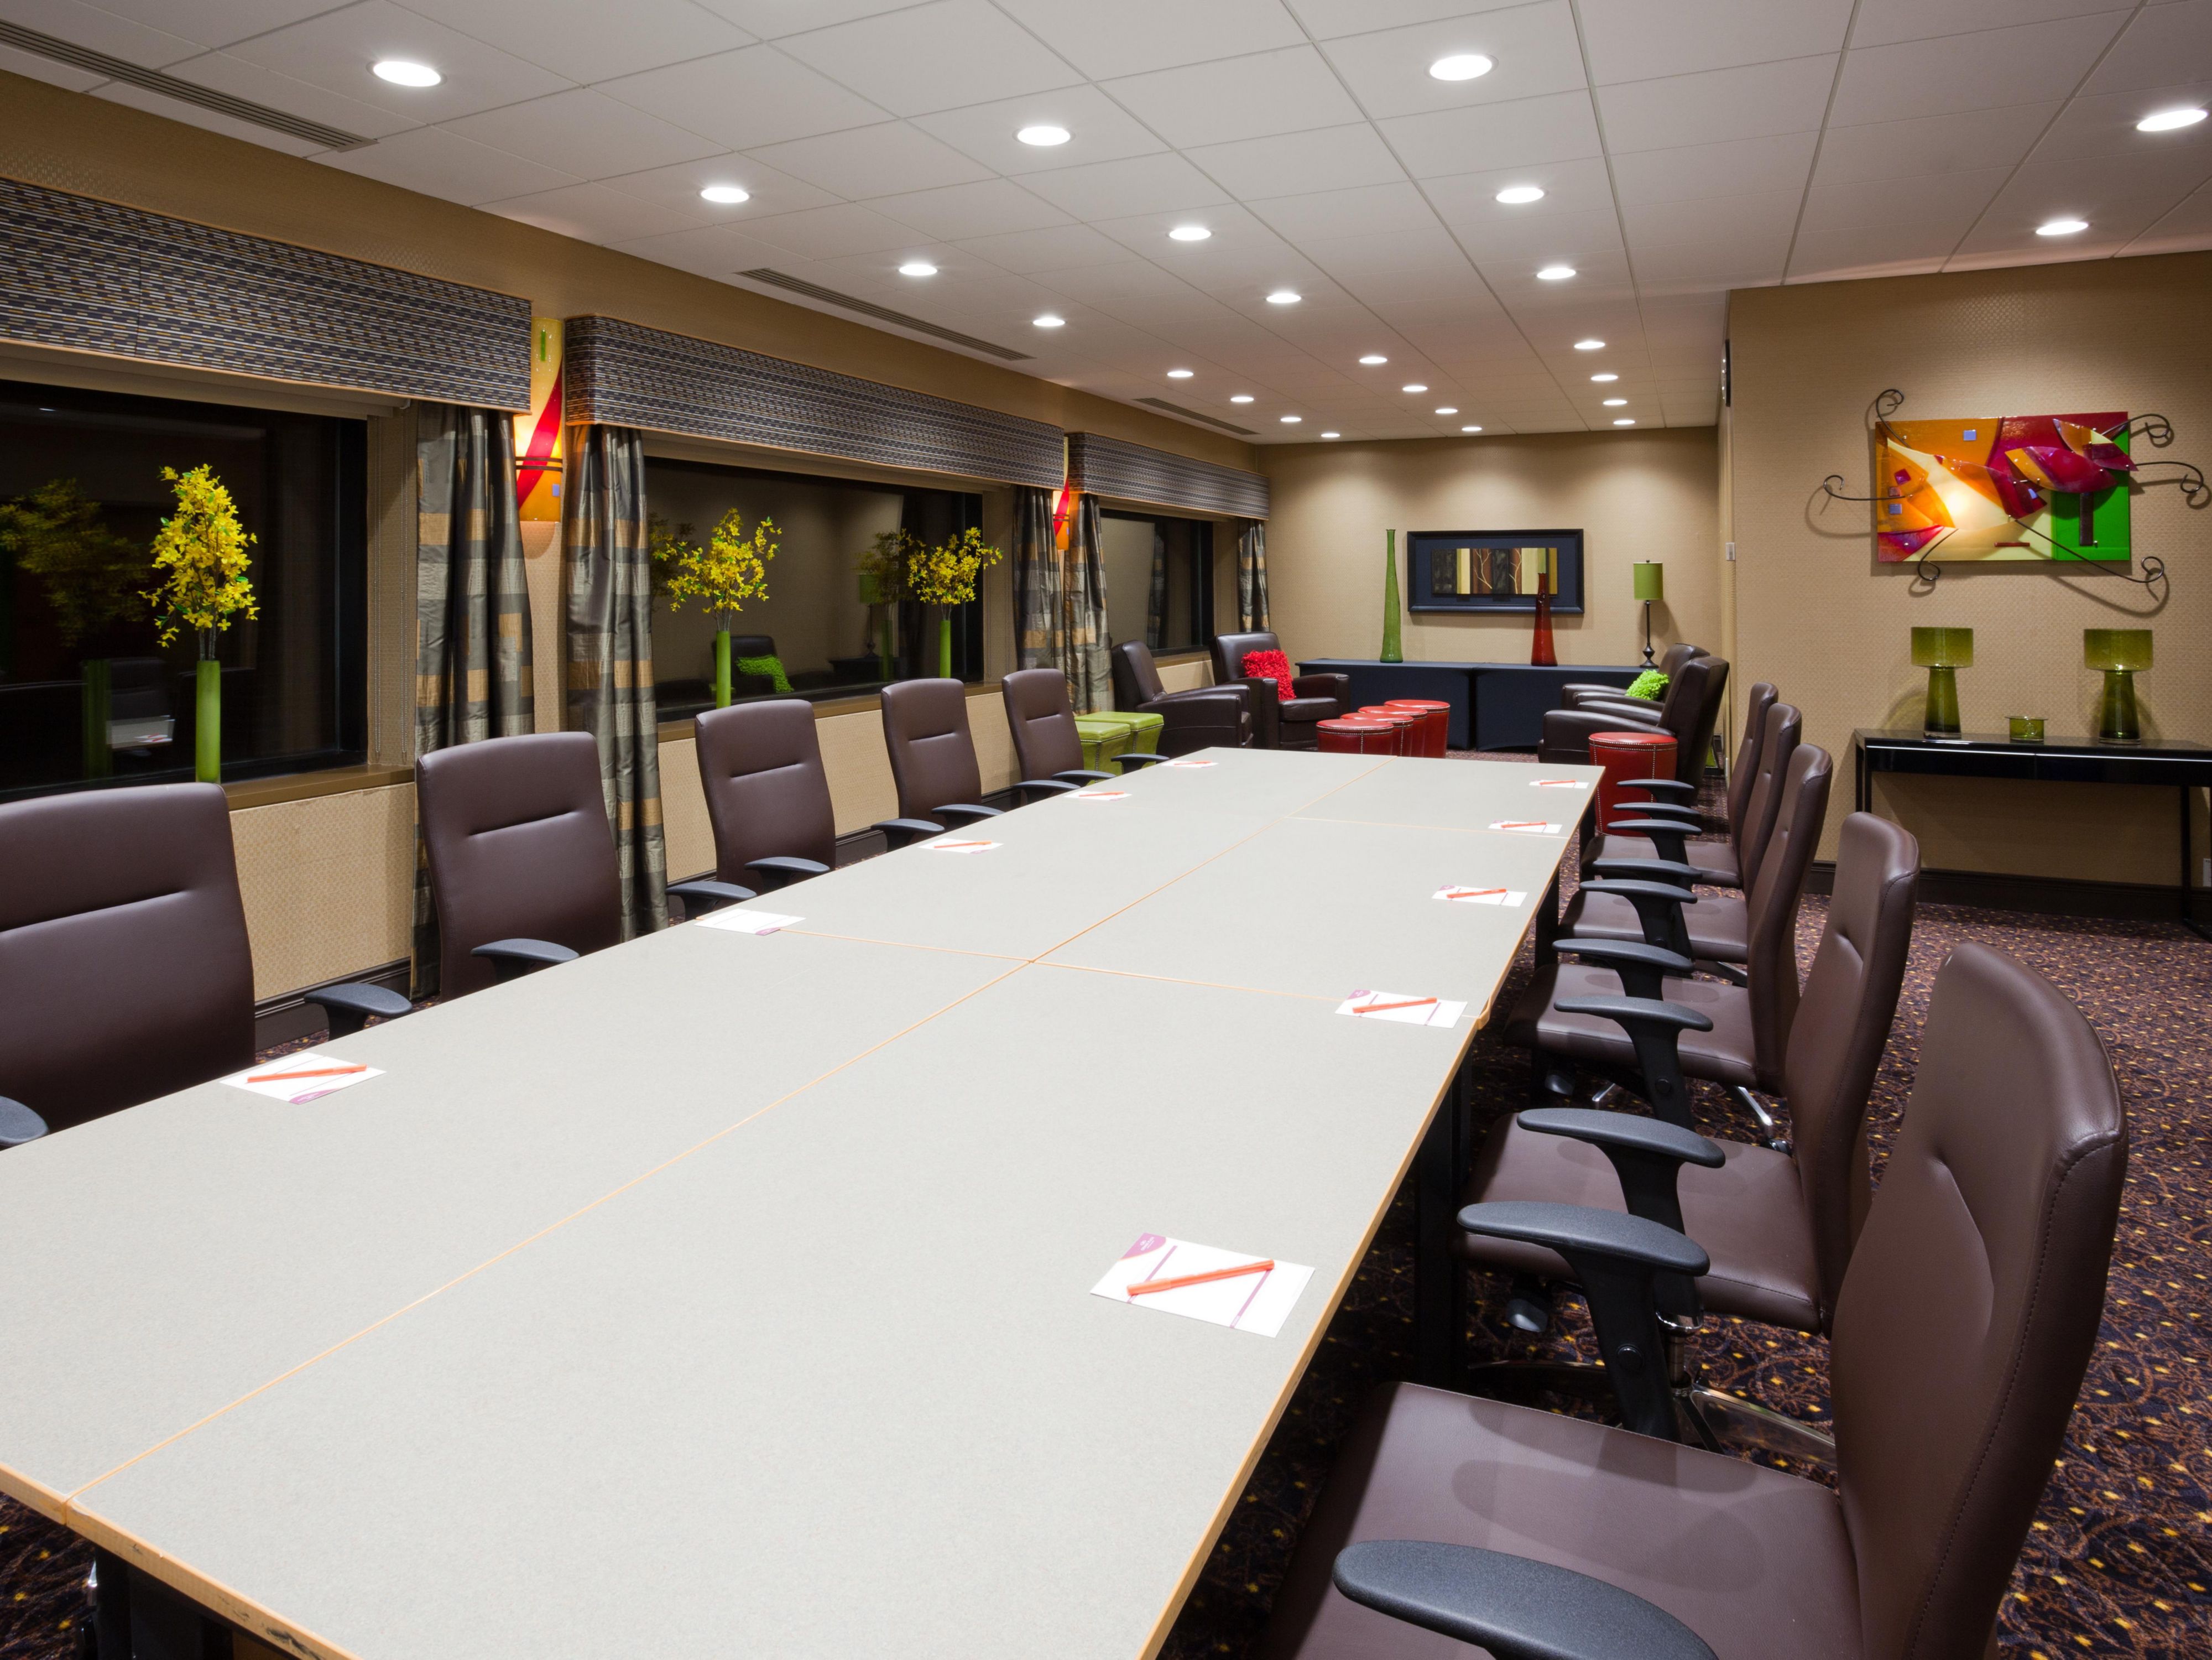 Safety is our top priority when having in person meetings. Our Clean Connect Day Meeting Package includes; a private sanitized meeting room, social distancing meeting sets, built-in A/V with virtual meeting options, served safe no-touch individual food and beverage options for breakfast, breaks, lunch and all service charges. 